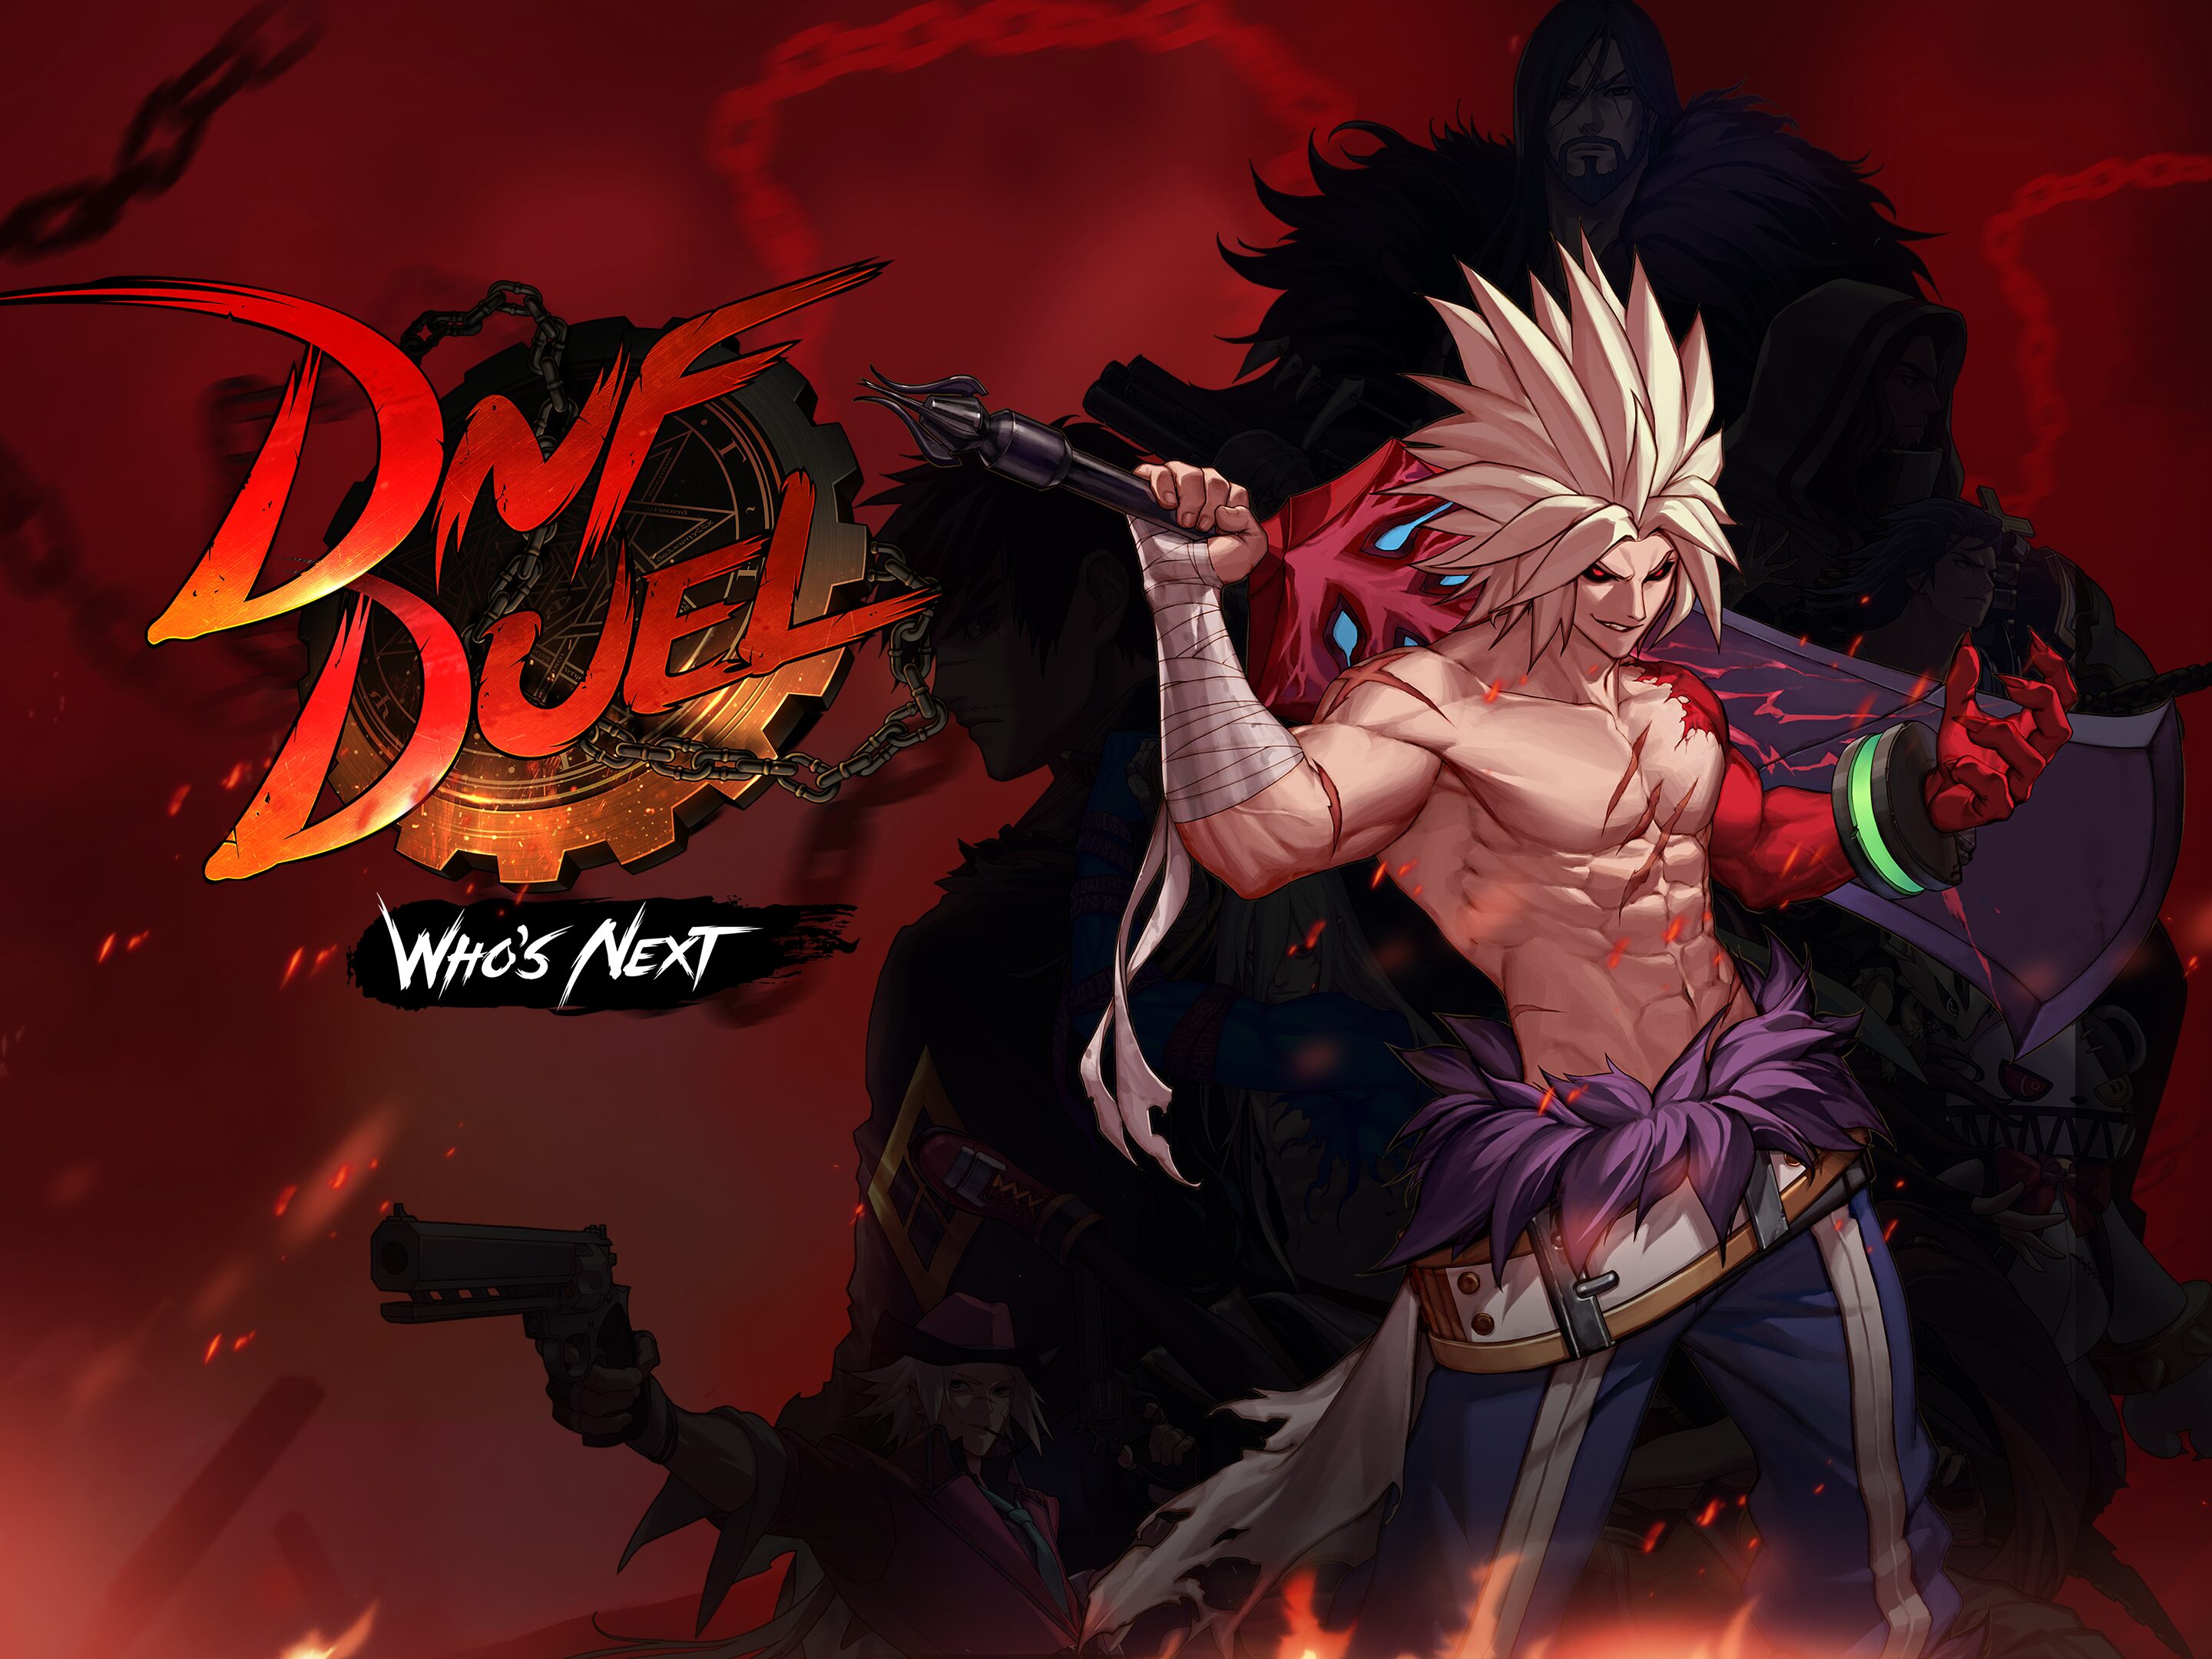 dnf dual download